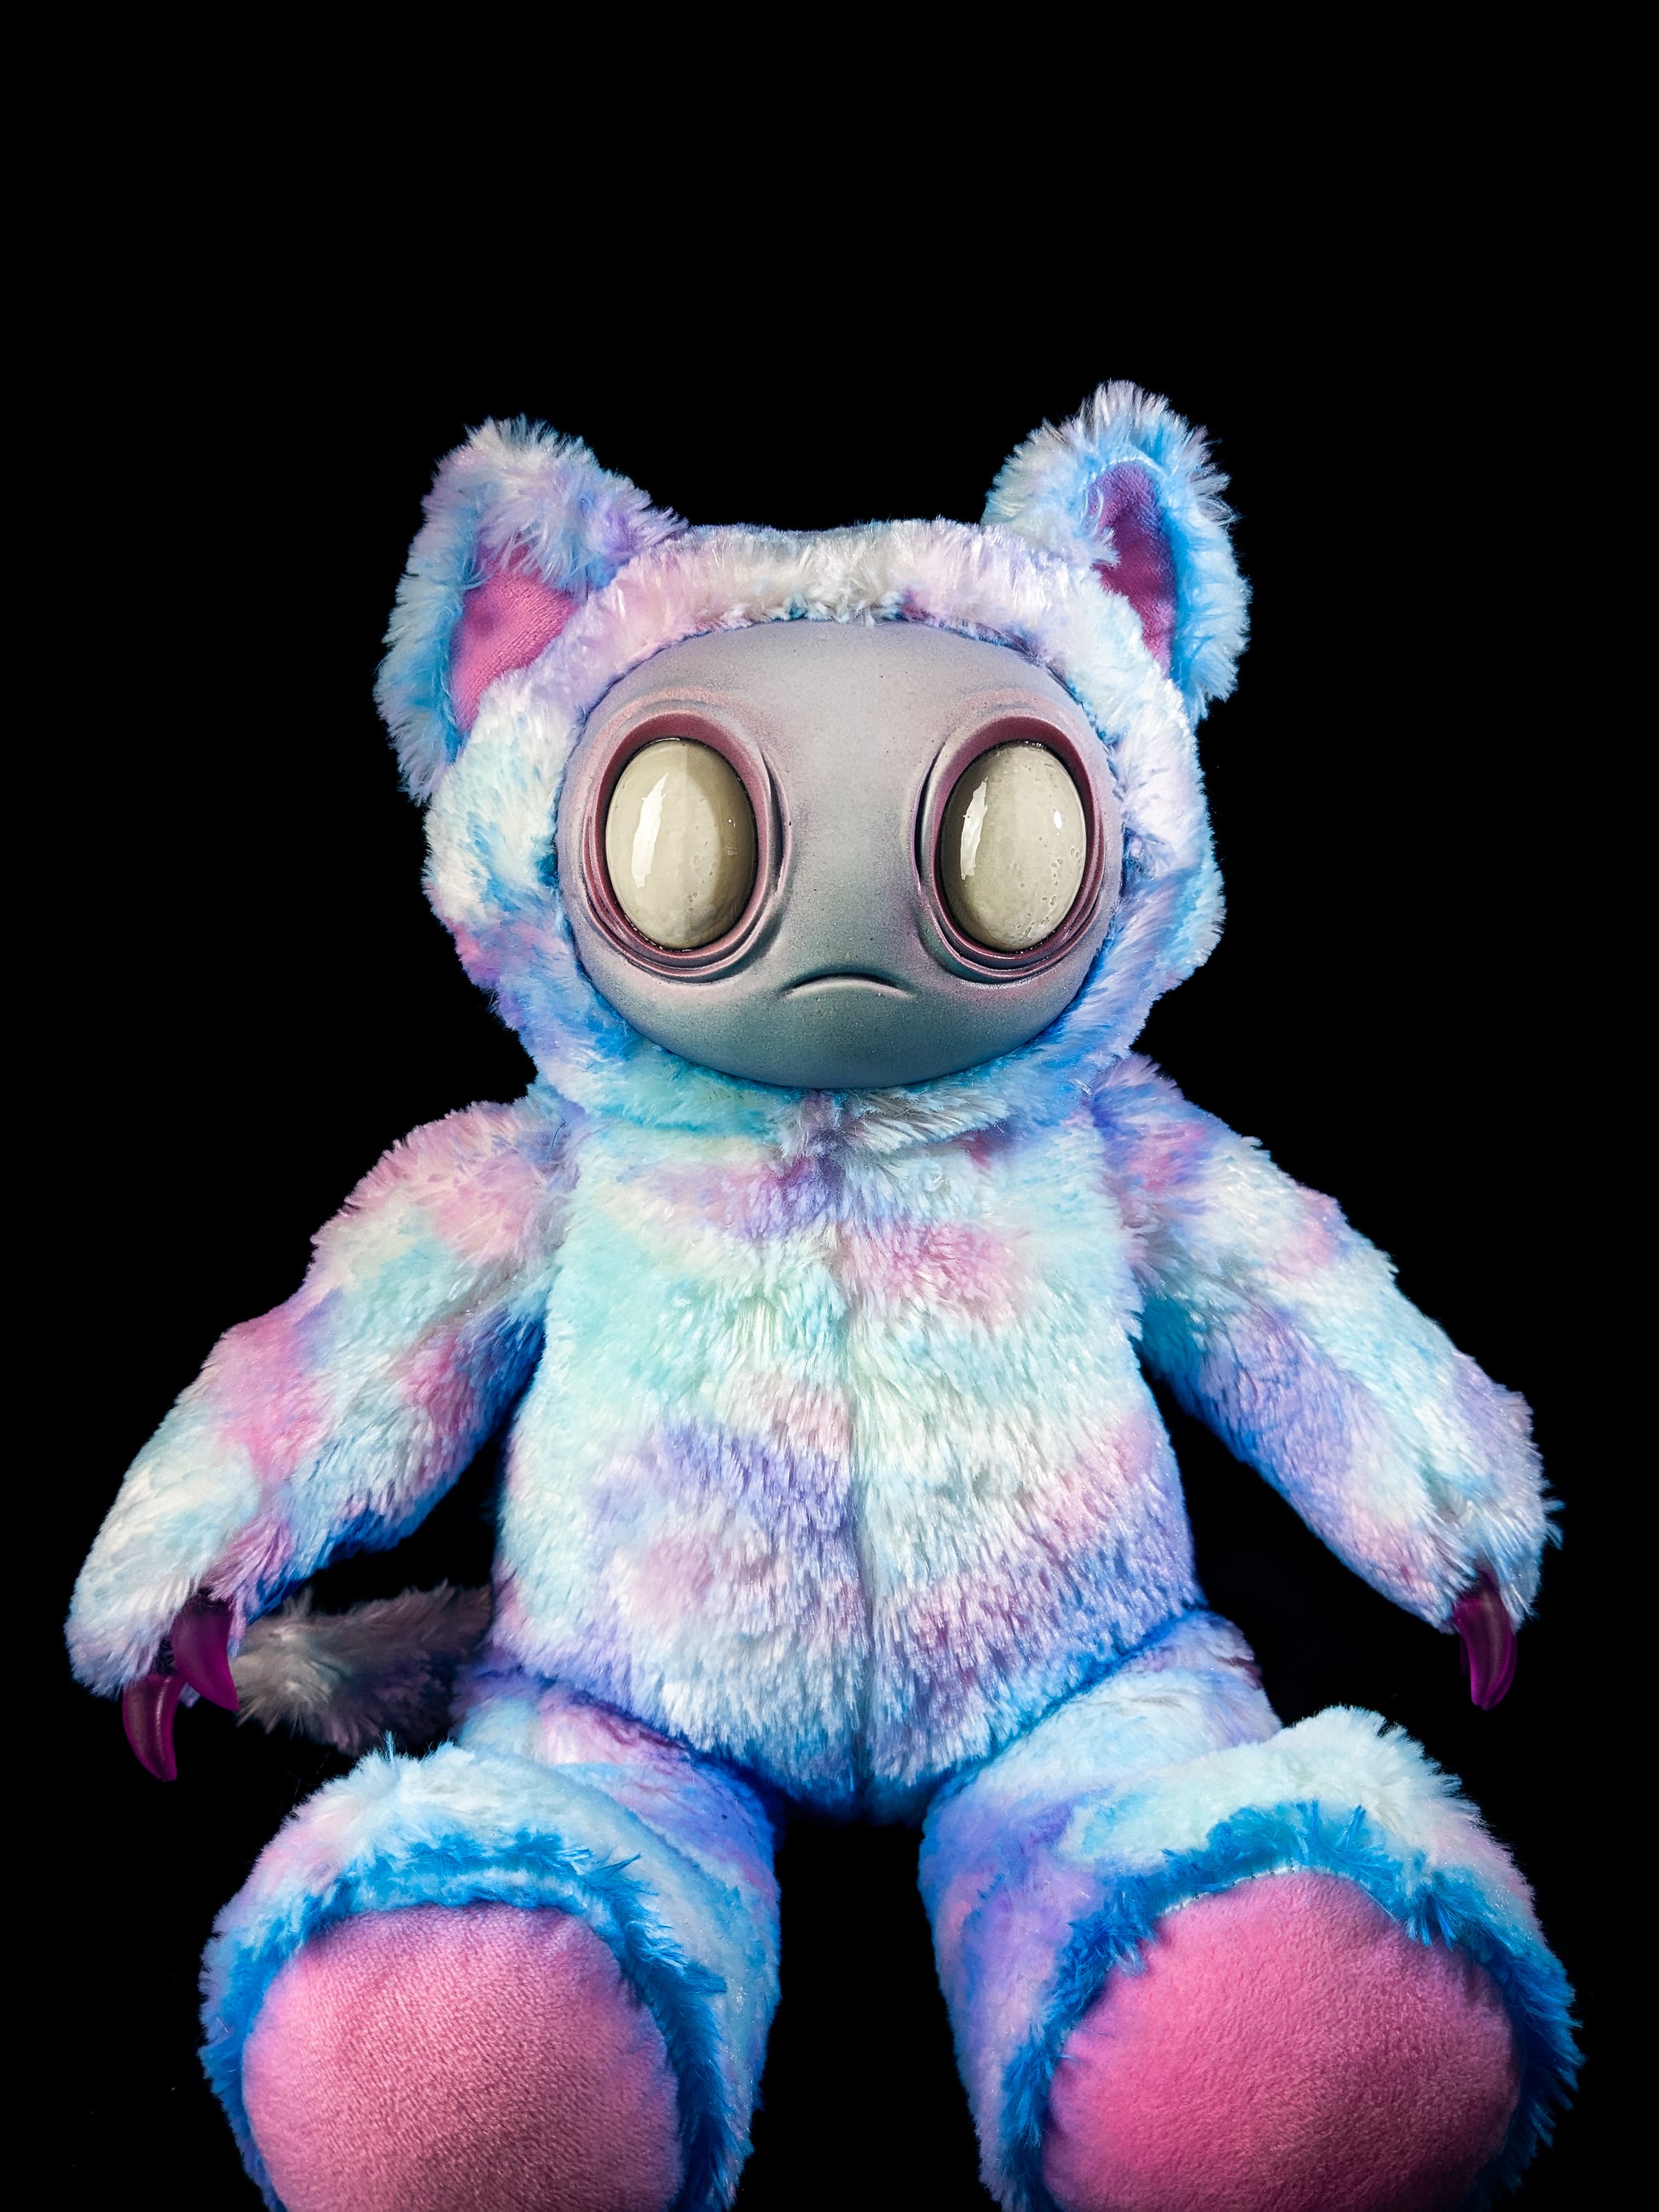 Candy Cat: MEEPORO - CRYPTCRITS Handmade Mystical Woodland Spirit Art Doll Plush Toy for Enigmatic Wanderers